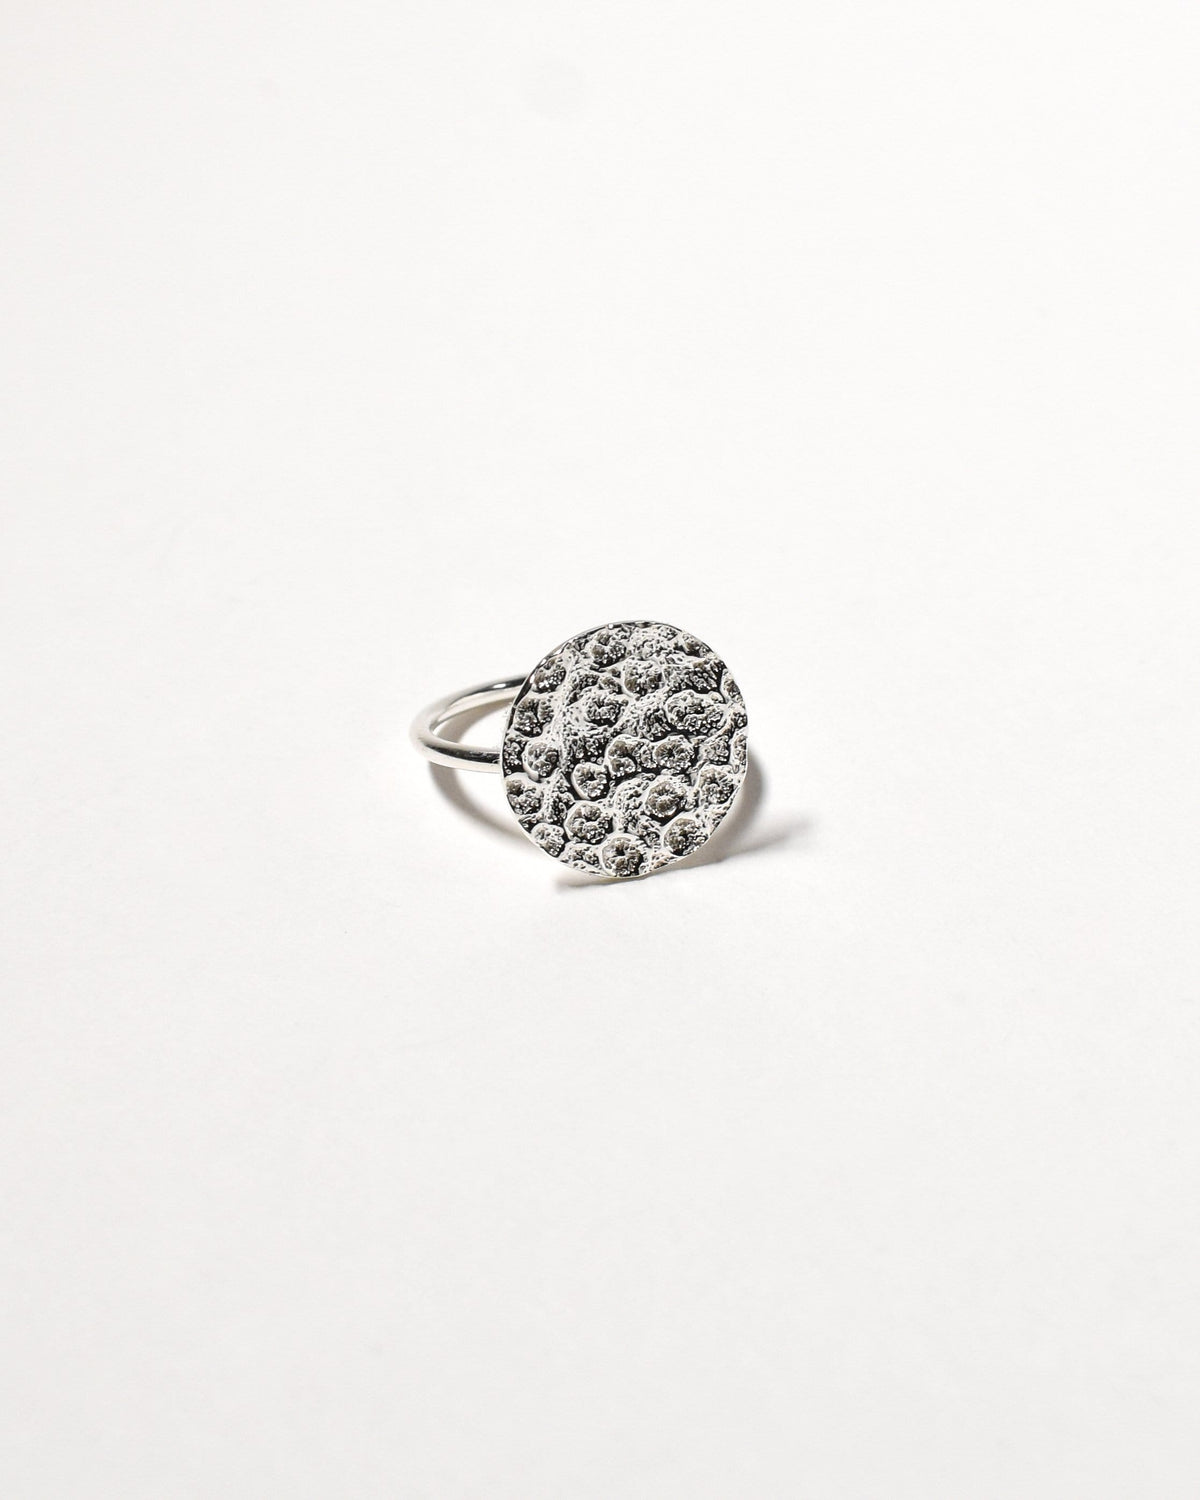 Marley Ring (Small), Sterling Silver